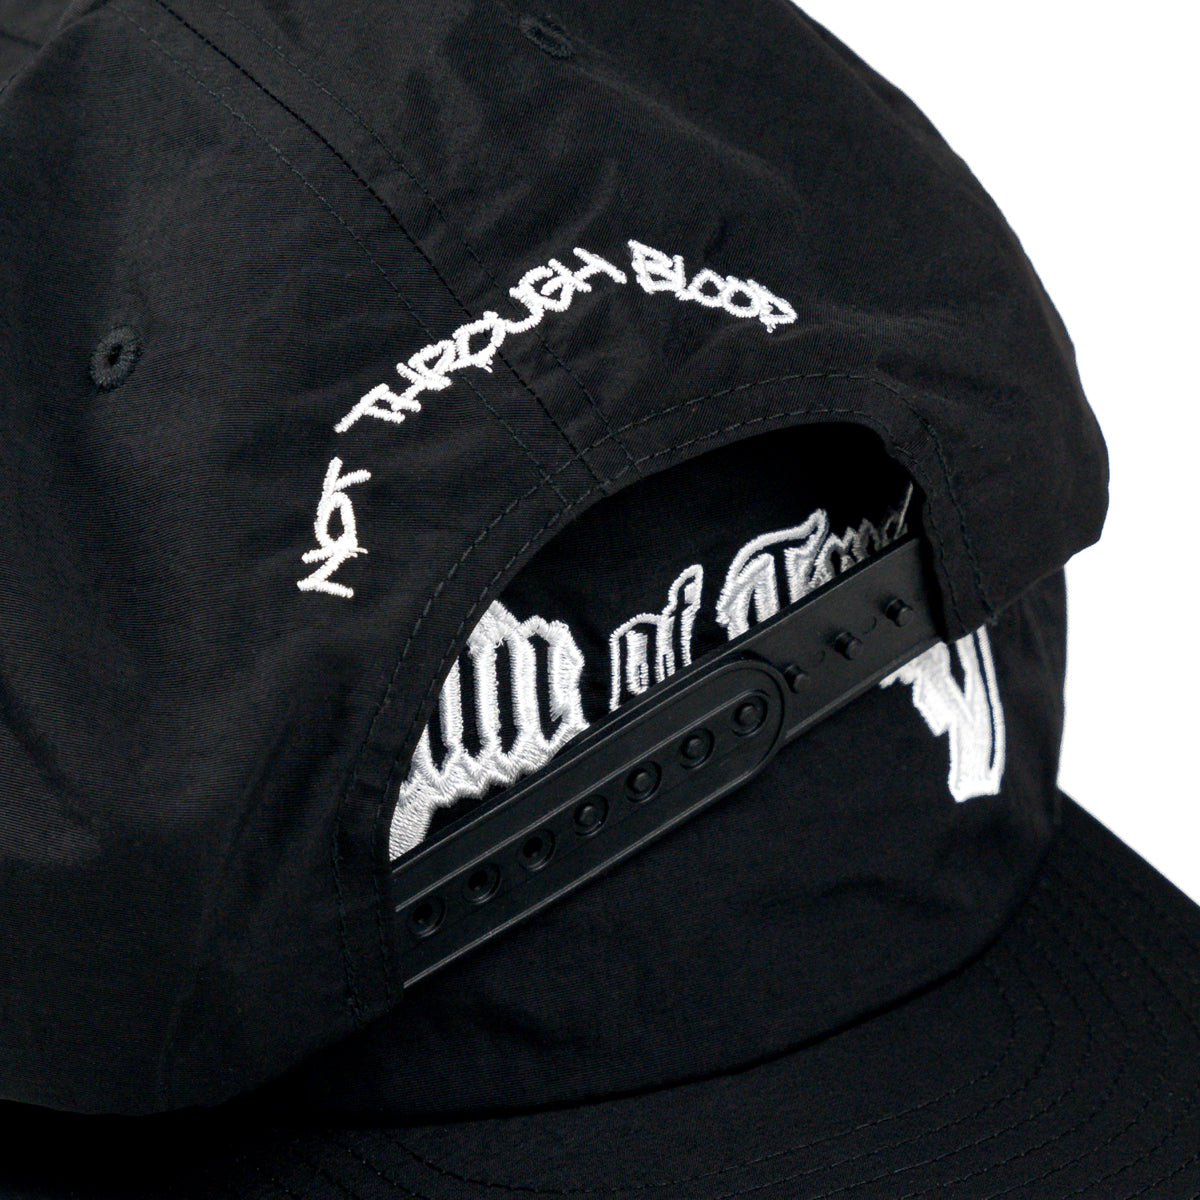 PAIN OF TRUTH "Not Through Blood" Snapback Cap